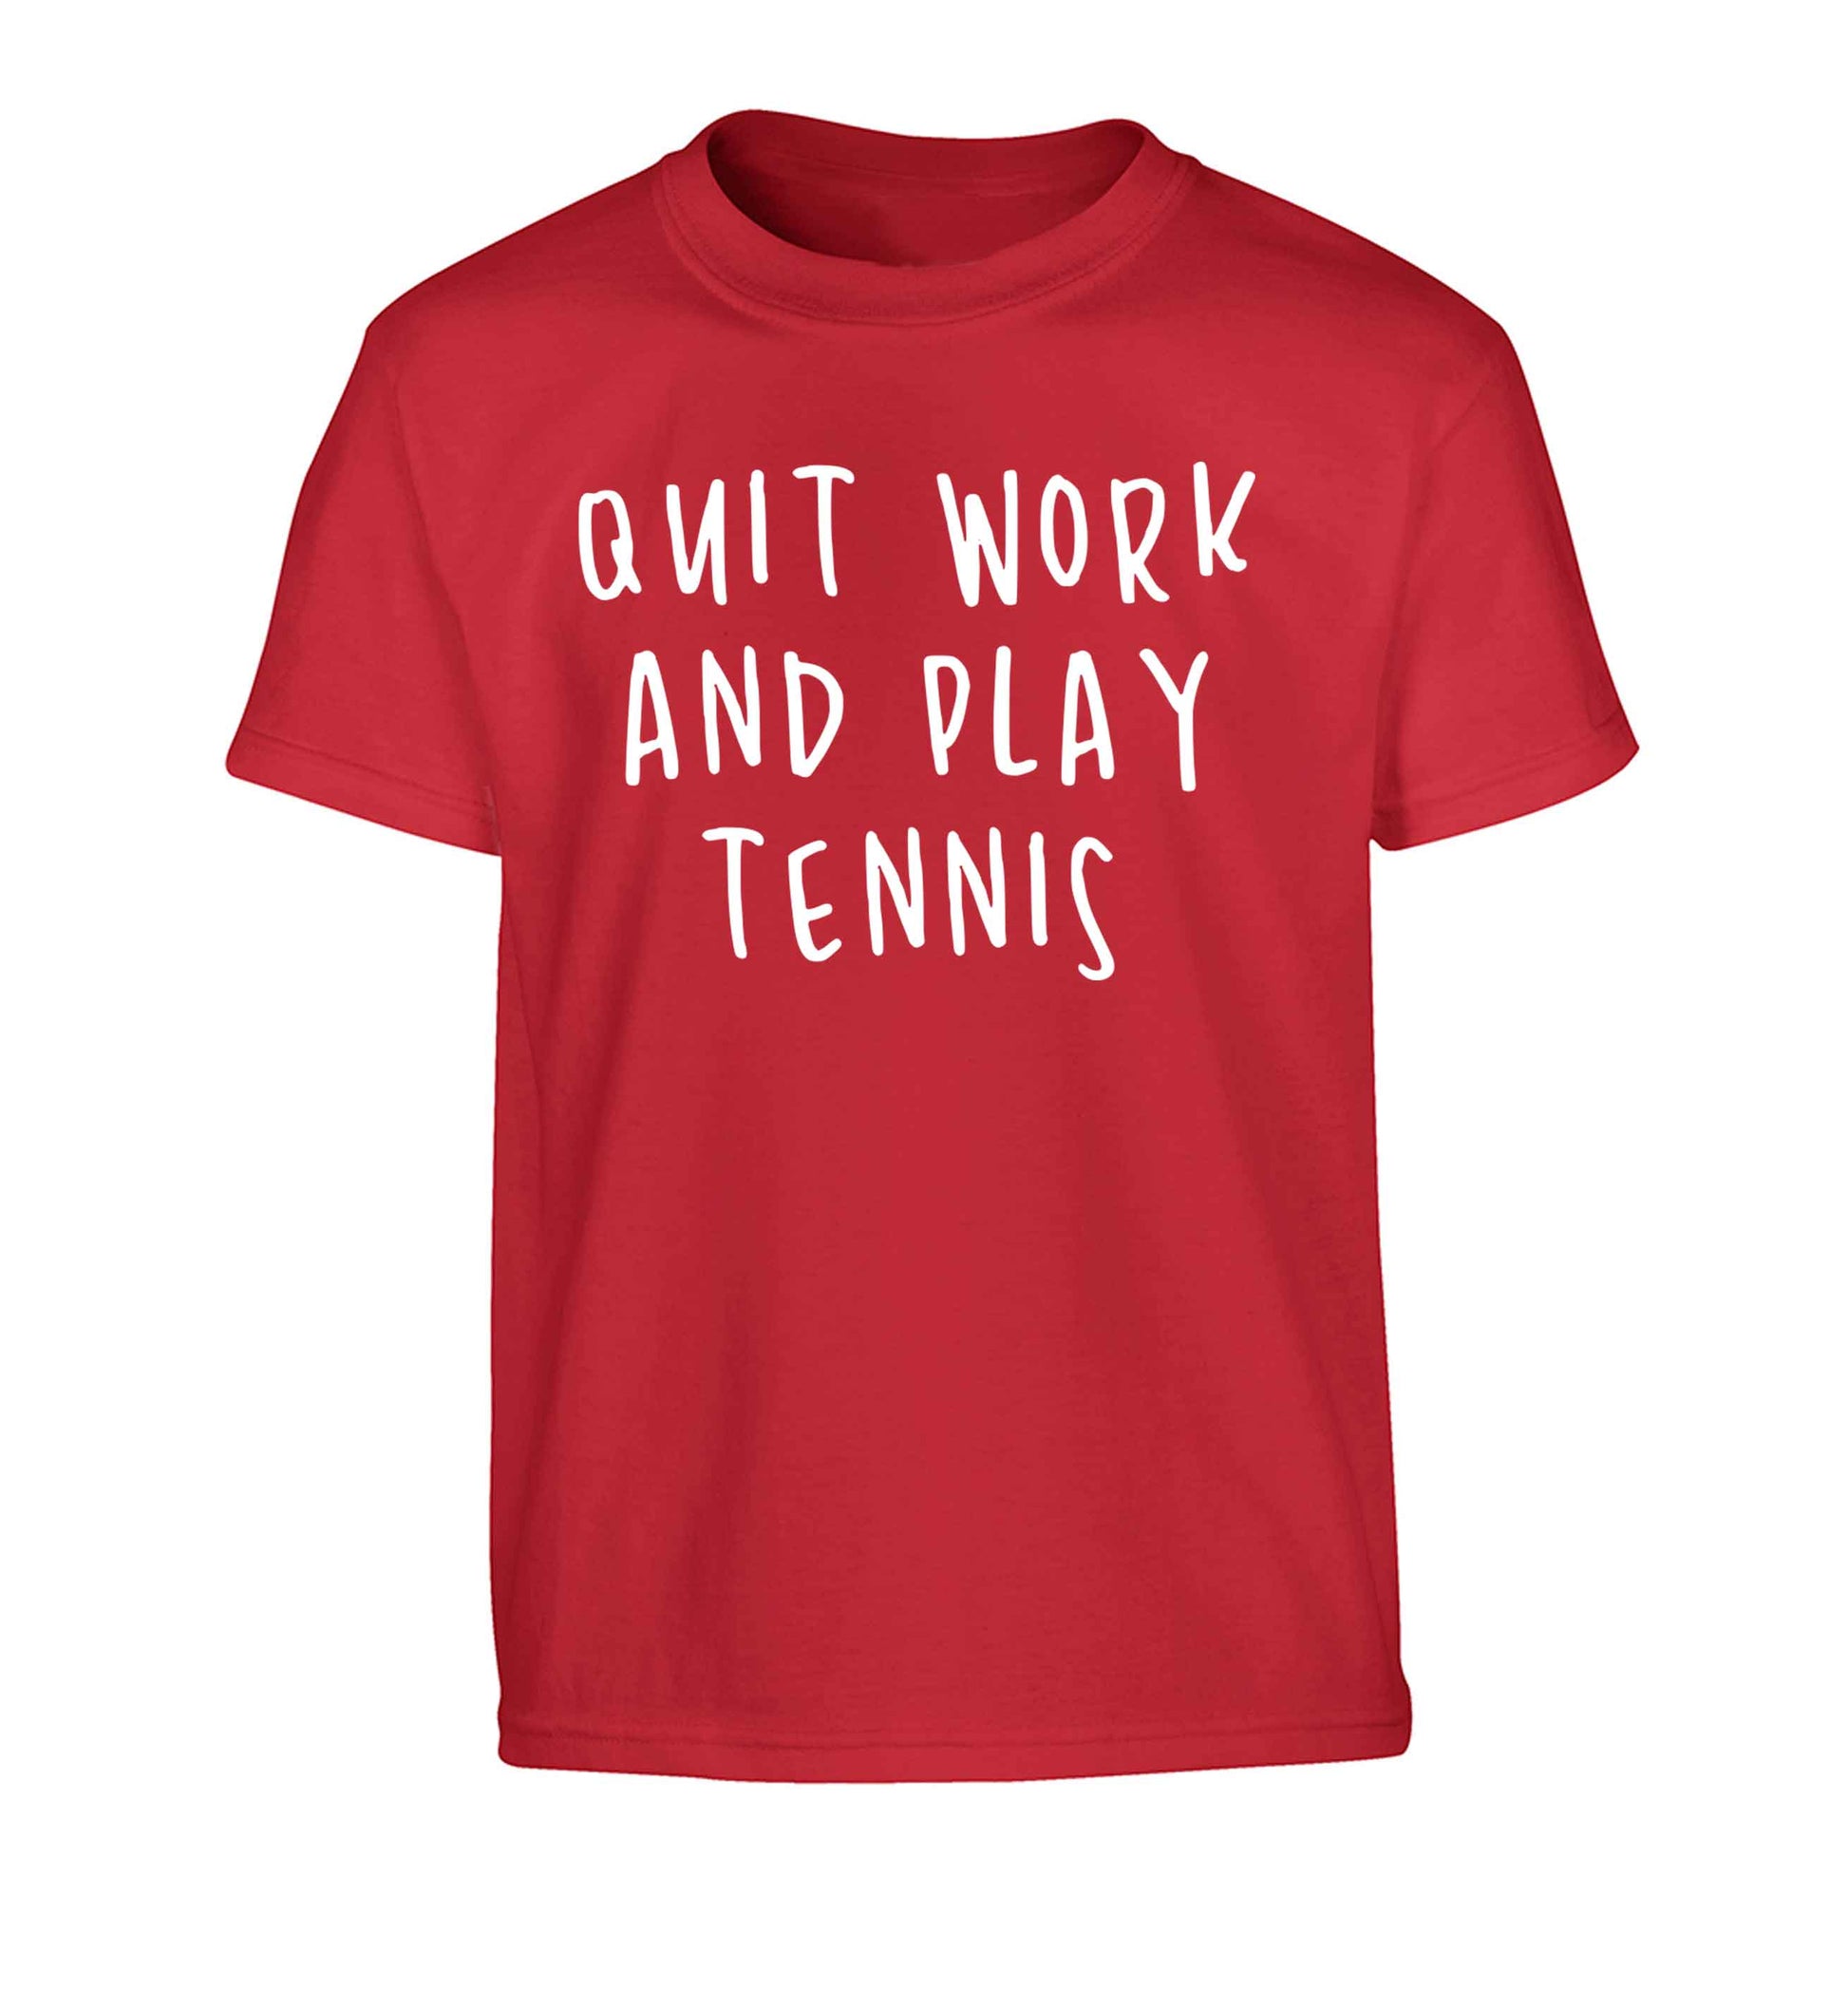 Quit work and play tennis Children's red Tshirt 12-13 Years